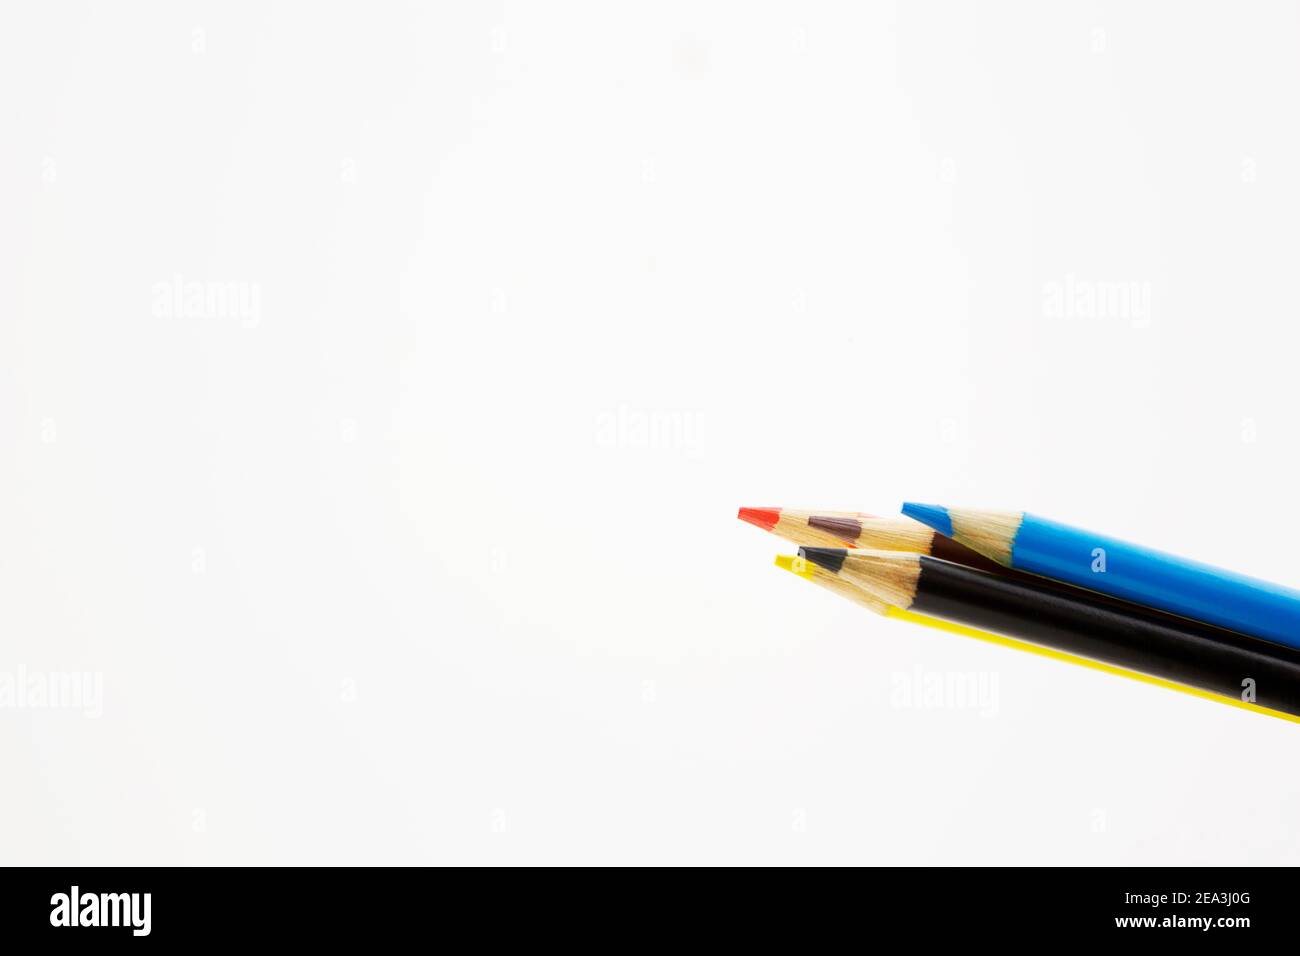 Background with copy space shows assortment of five colored pencils, orange, yellow,  black, blue, brown, symbols of strategic choices Stock Photo